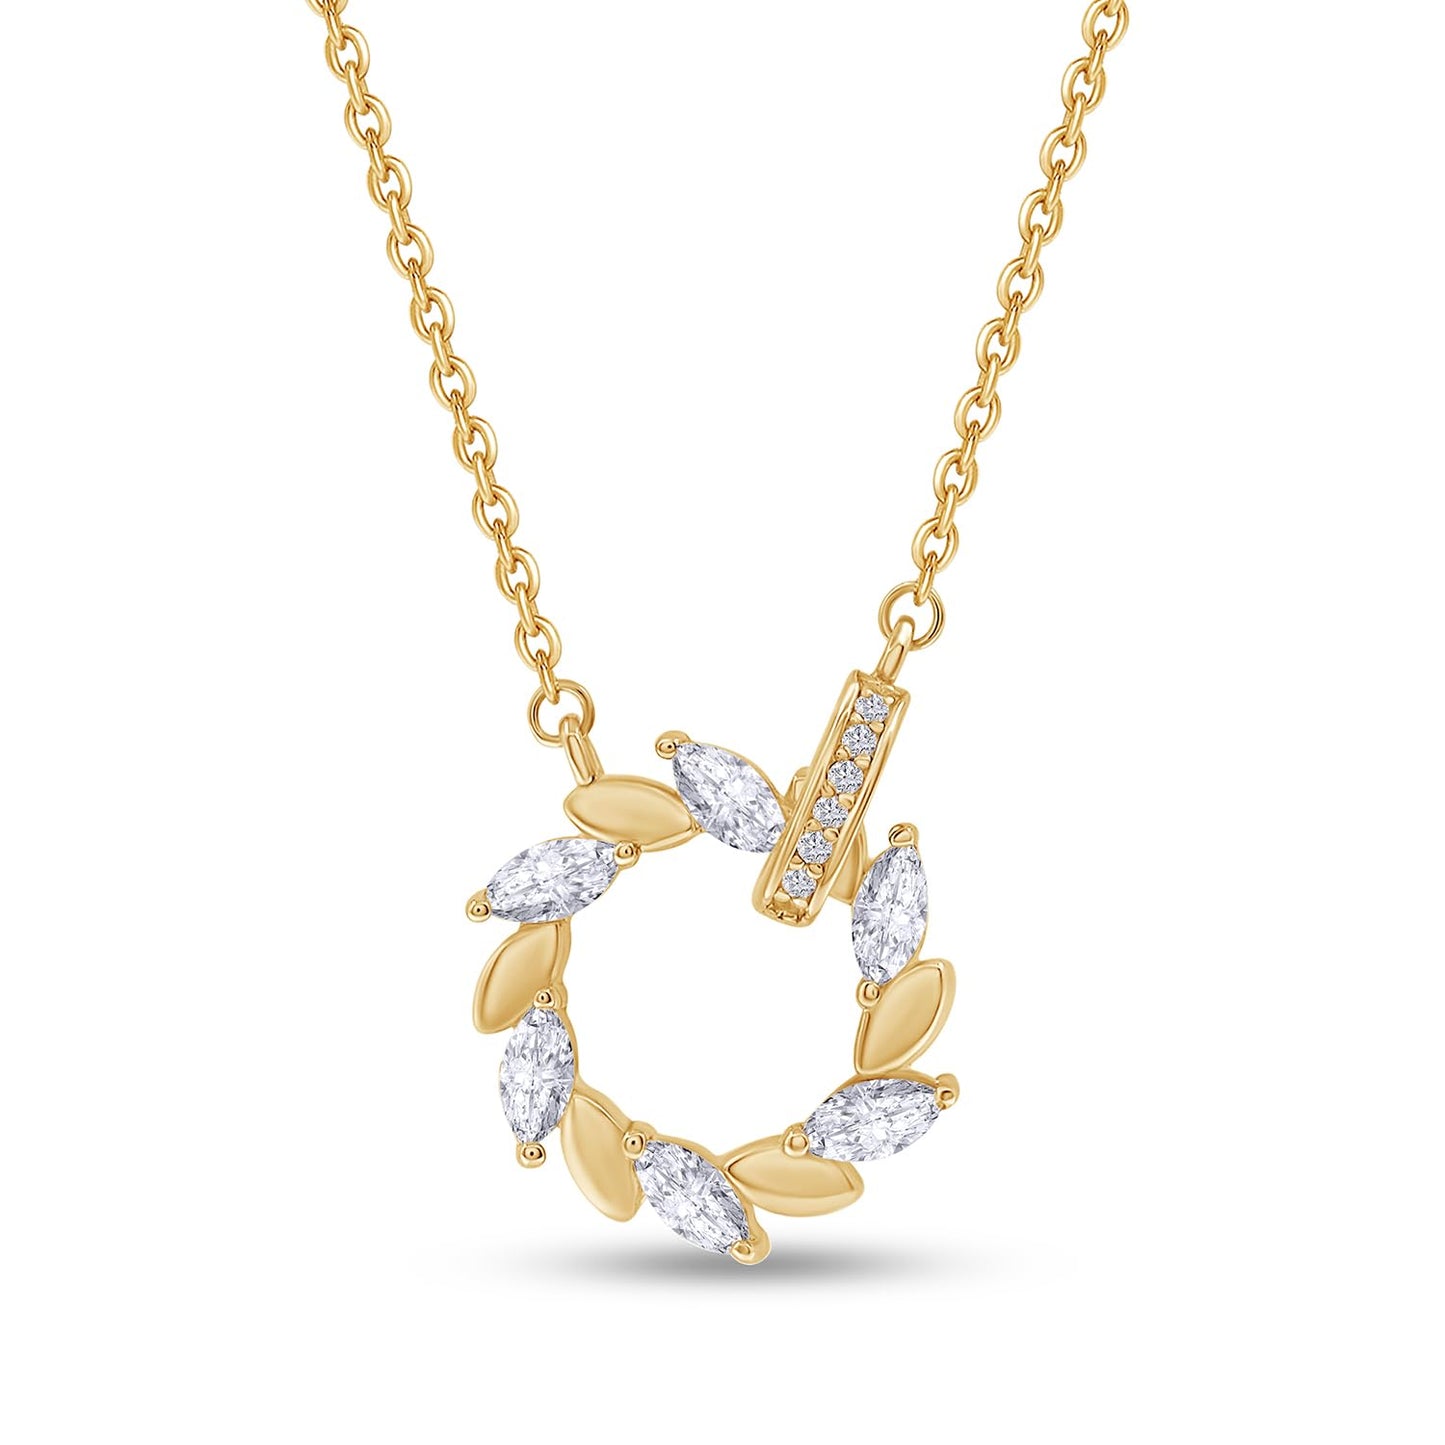 Marquise White Cubic Zirconia Circle Leaf Pendant Necklace For Women In 925 Sterling Silver